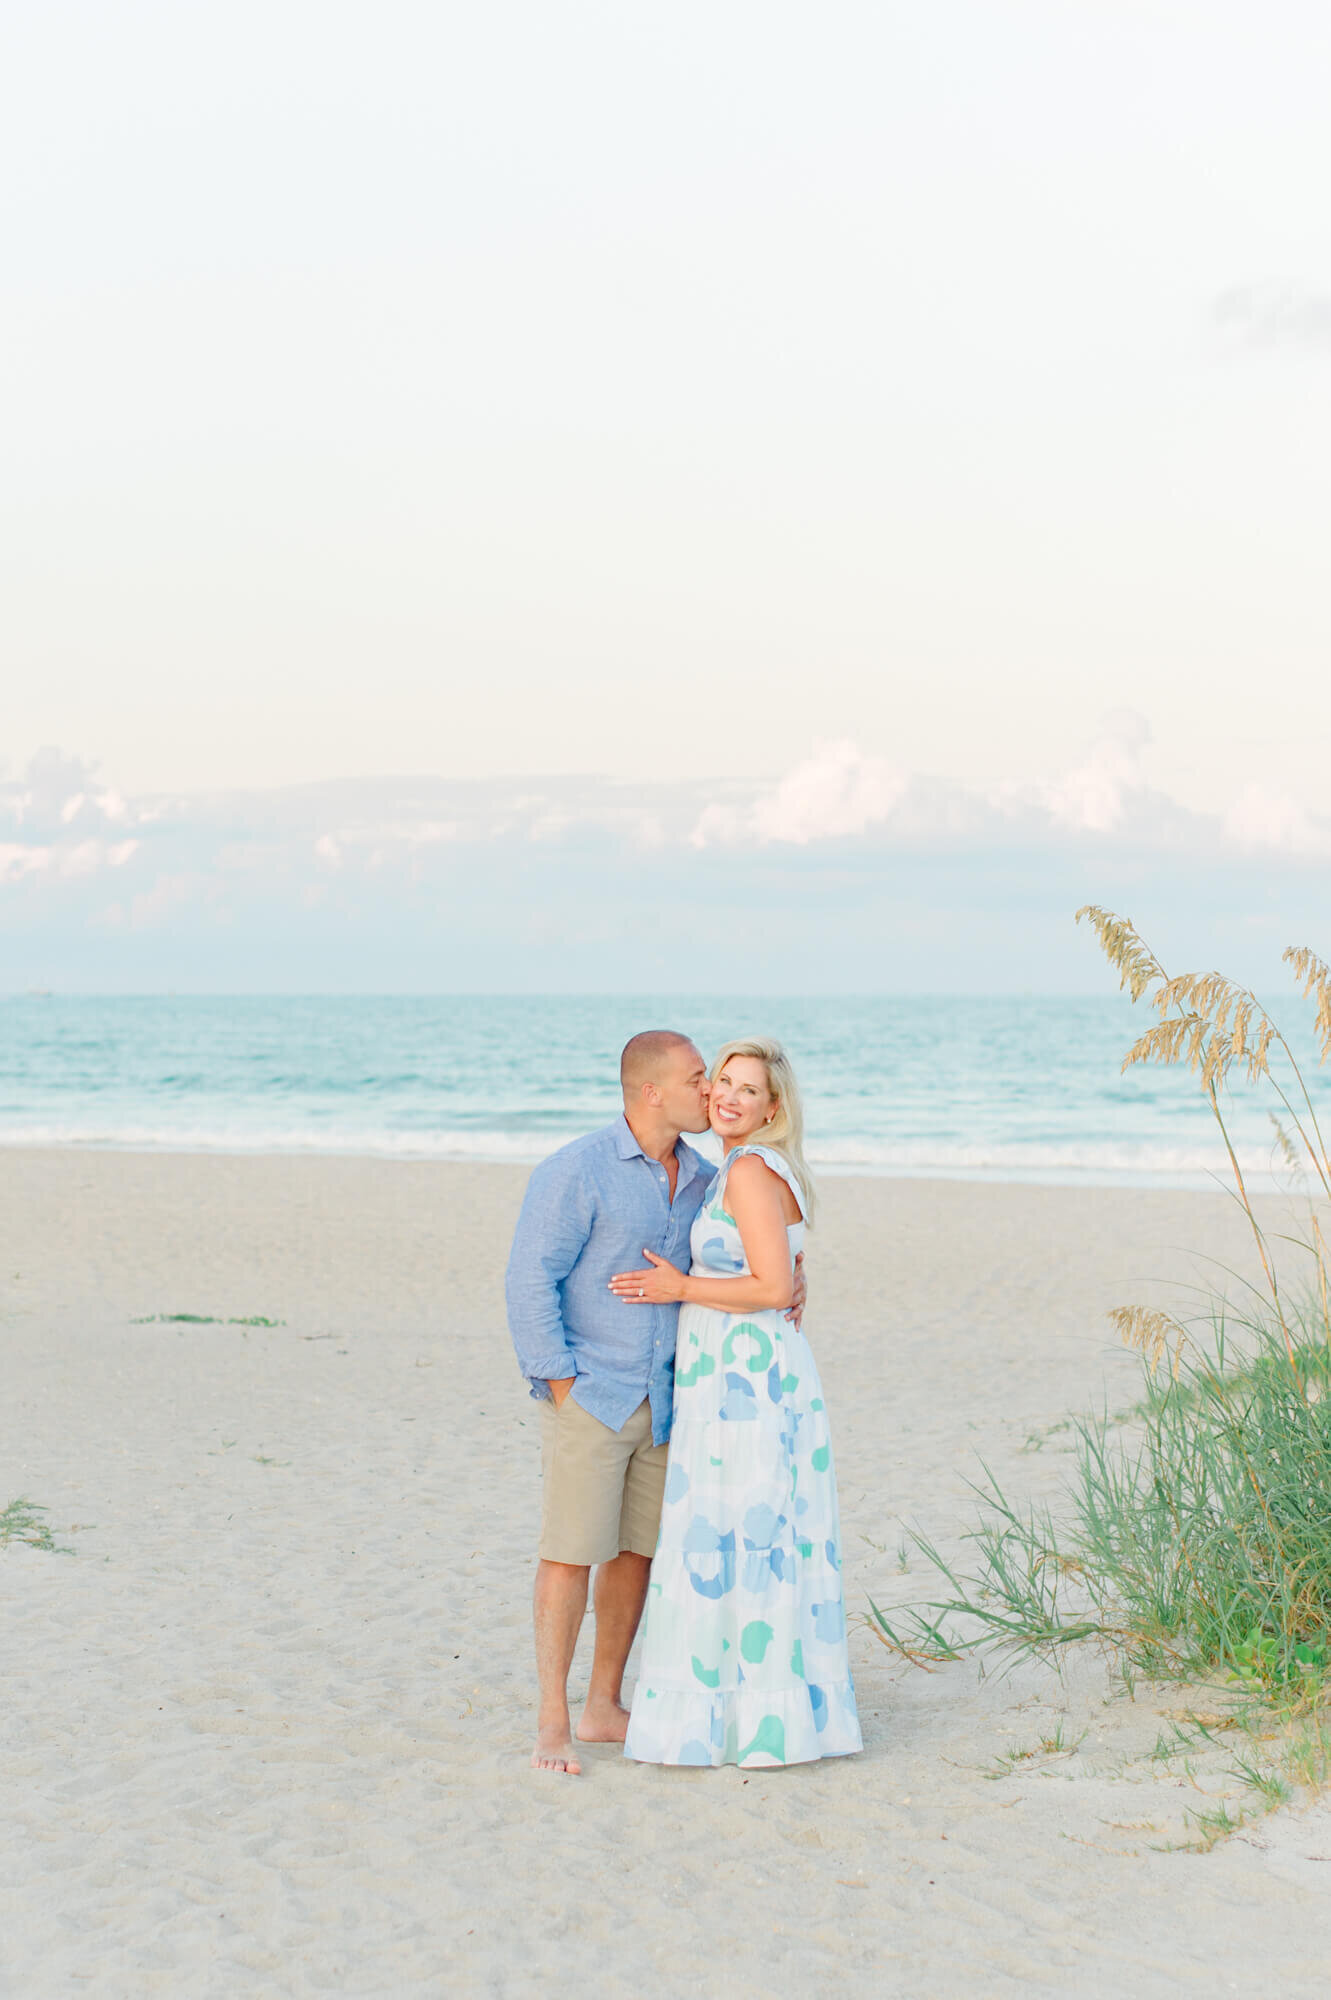 Husband kissing wife on the cheek with the beach in the background